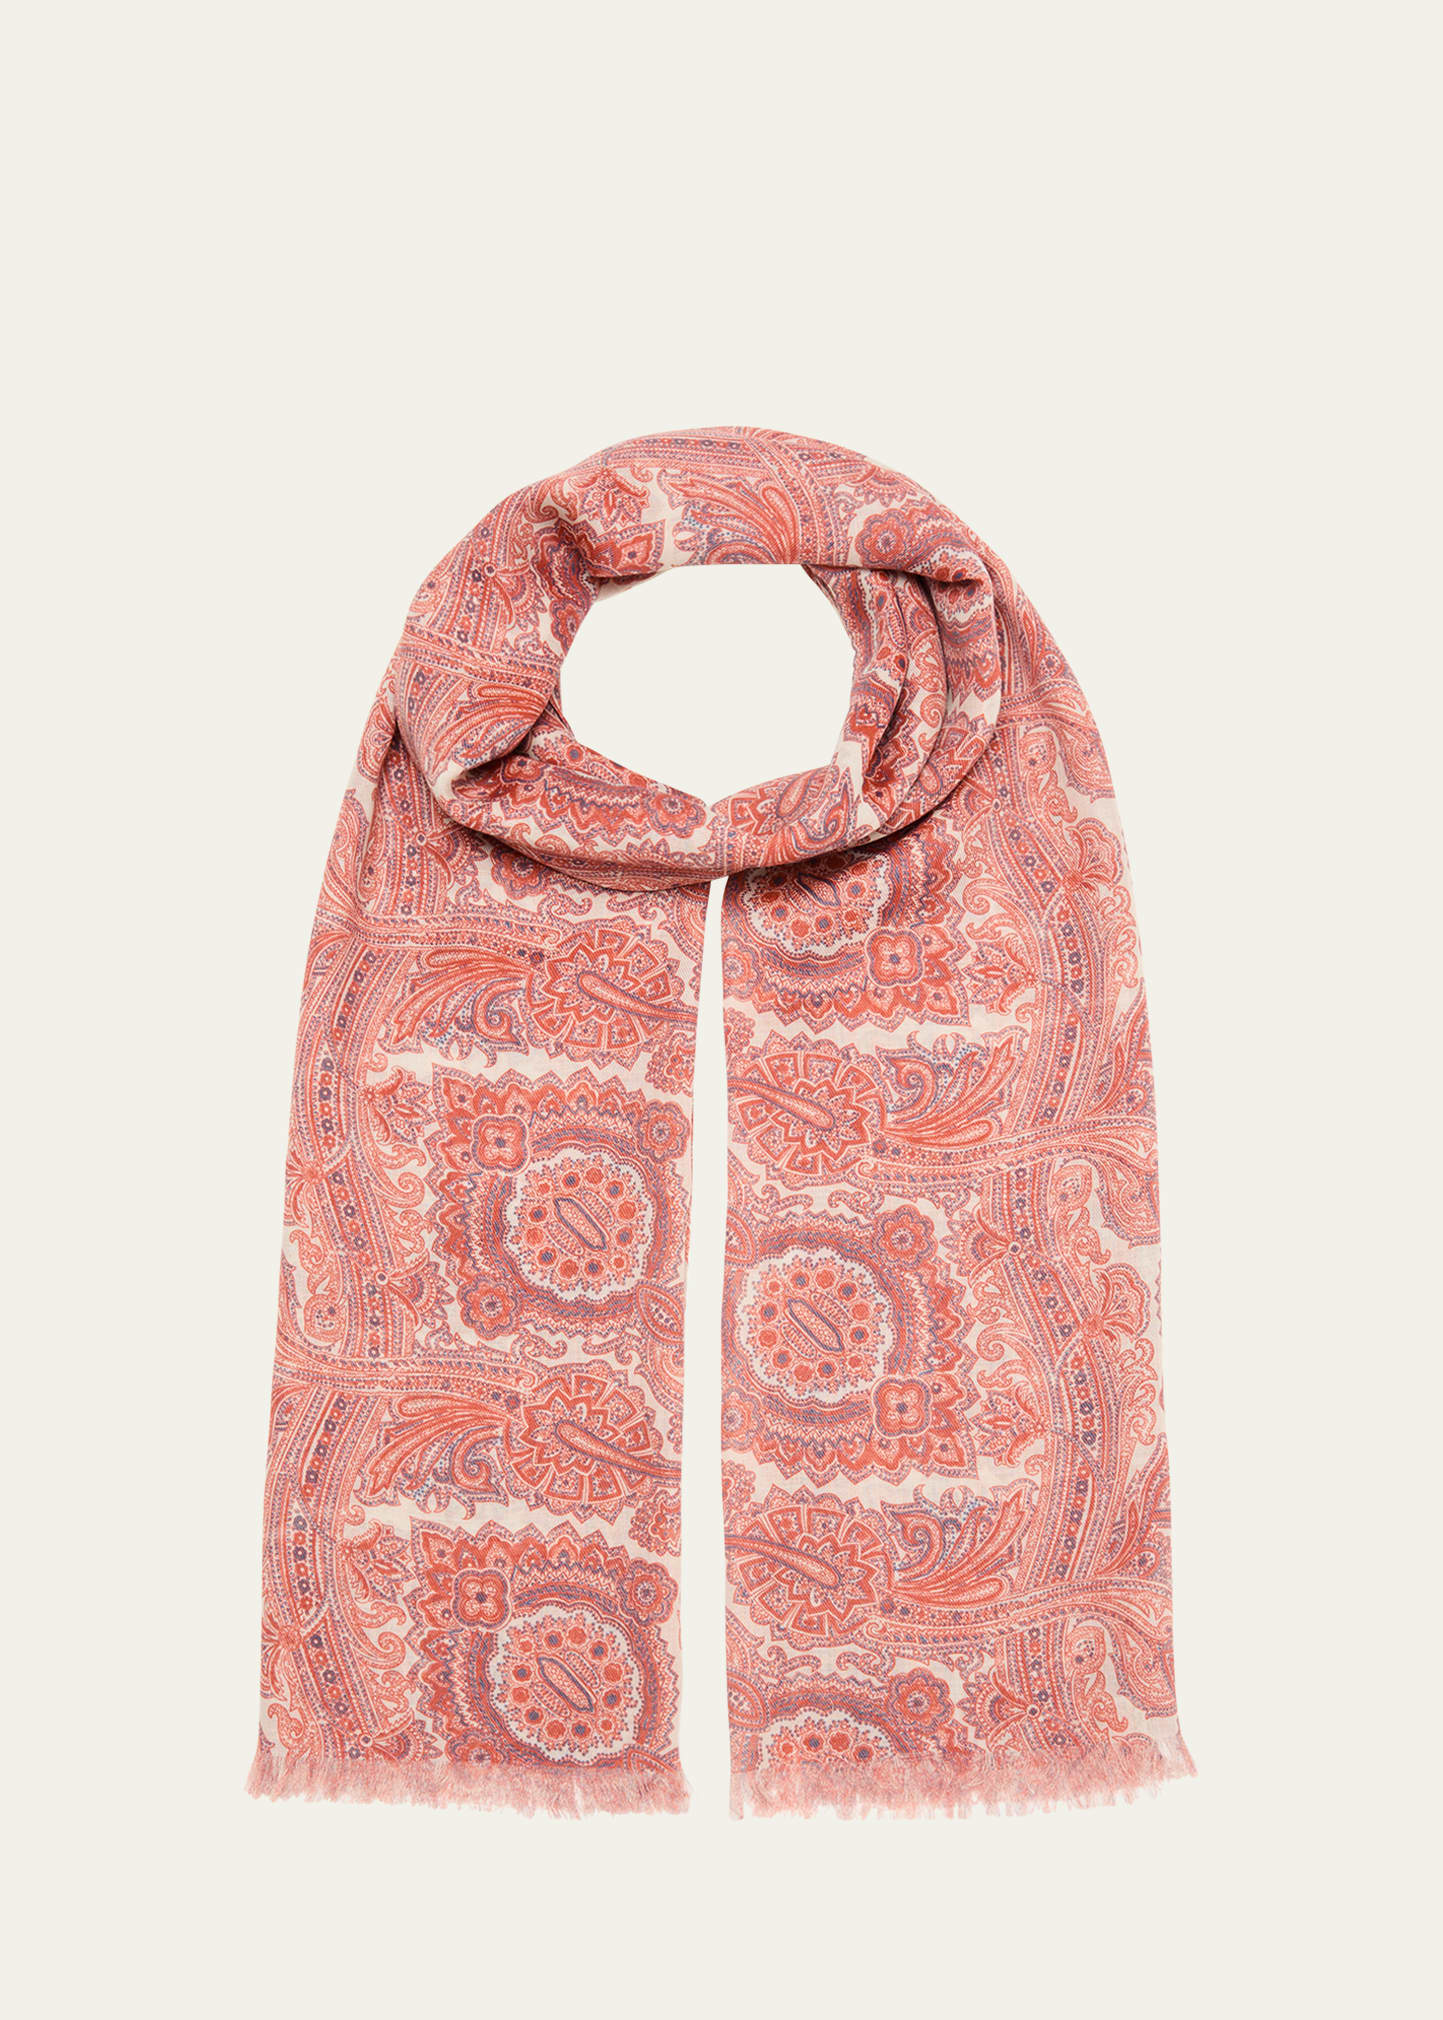 Men's Cashmere and Silk Paisley-Print Scarf